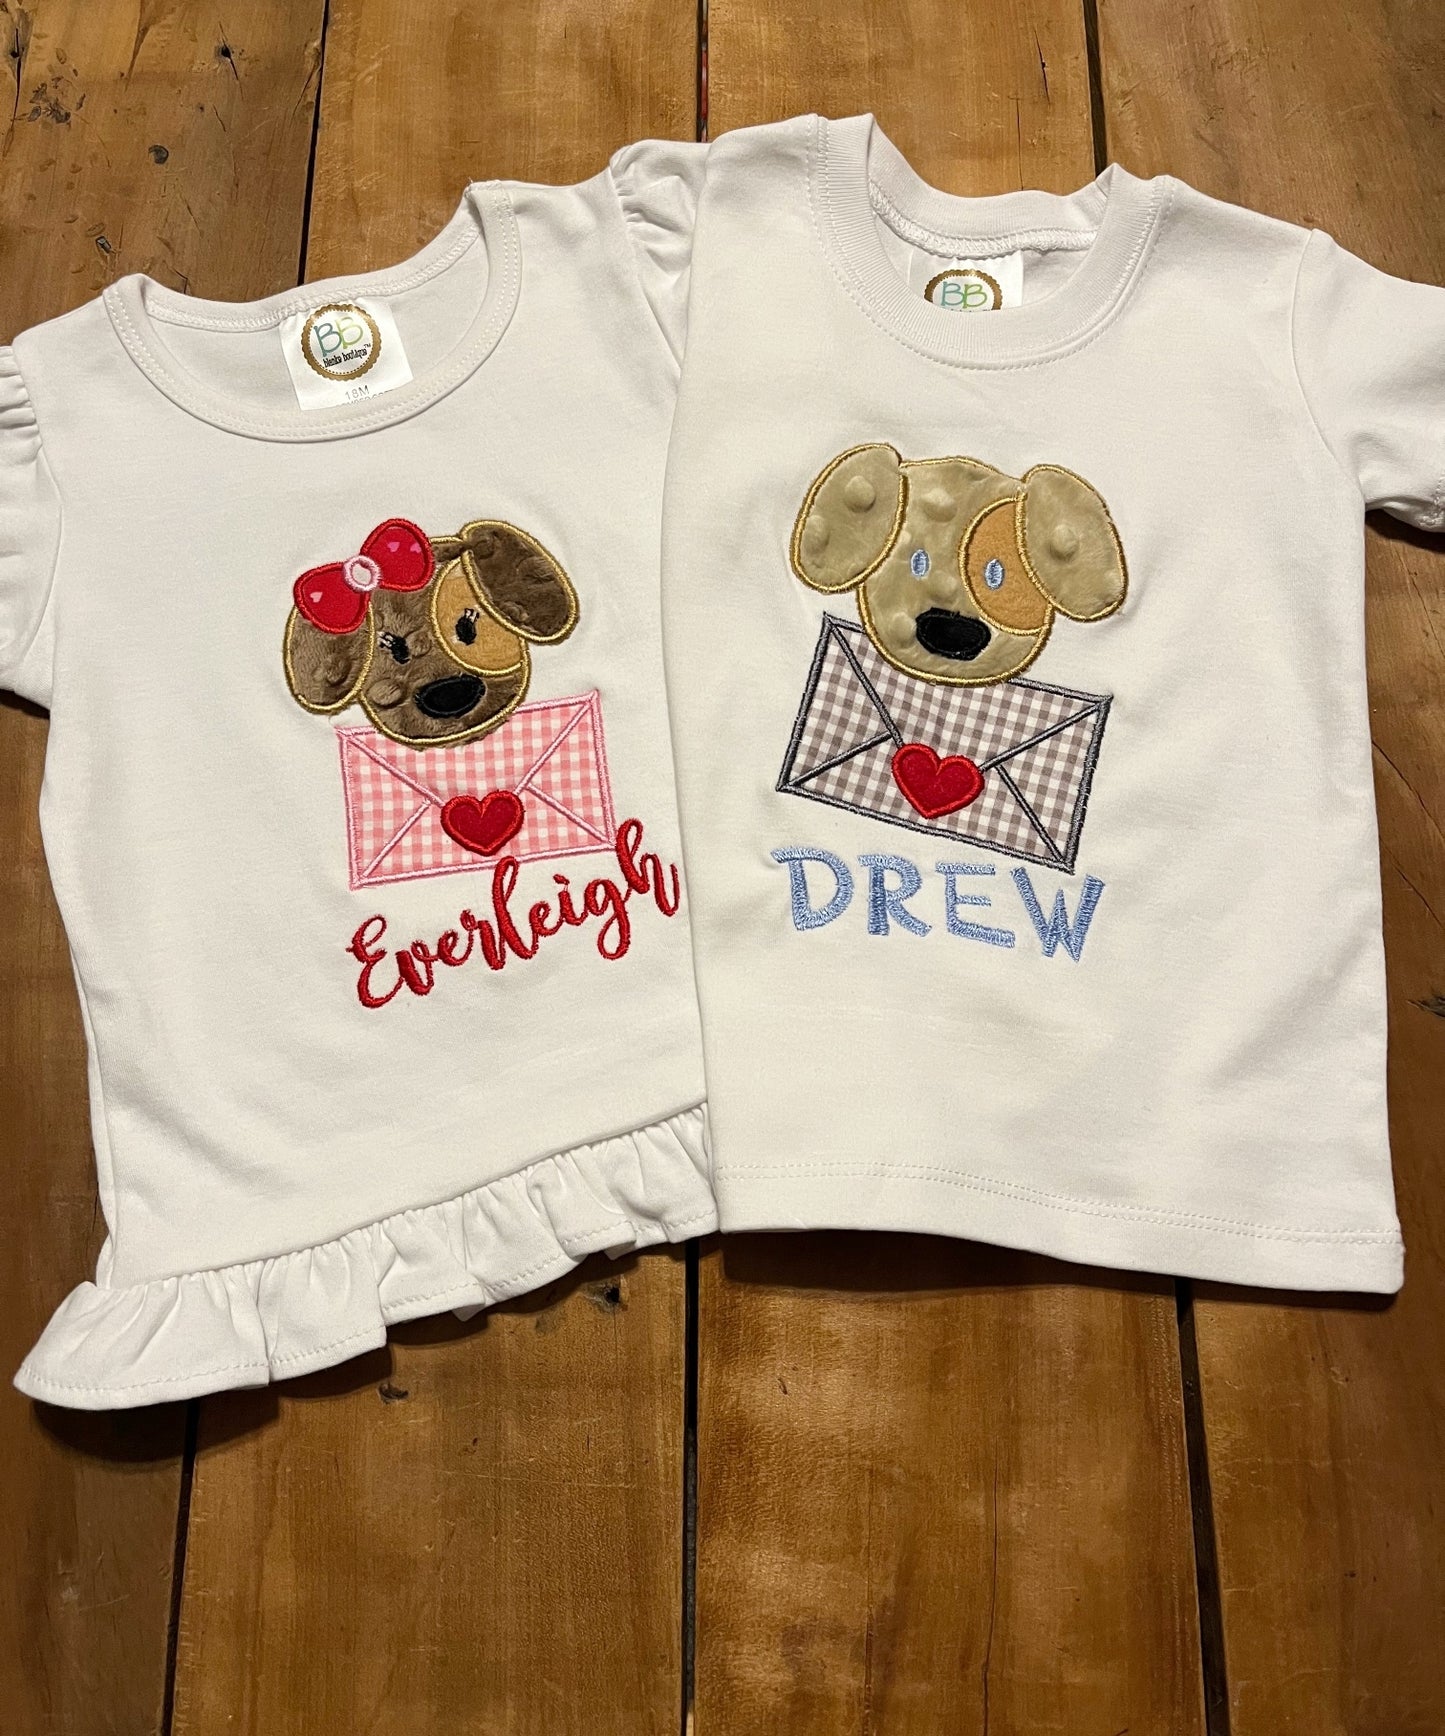 Brother and Sister shirts are available in my shop. white shirt with puppy valentine's day applique design